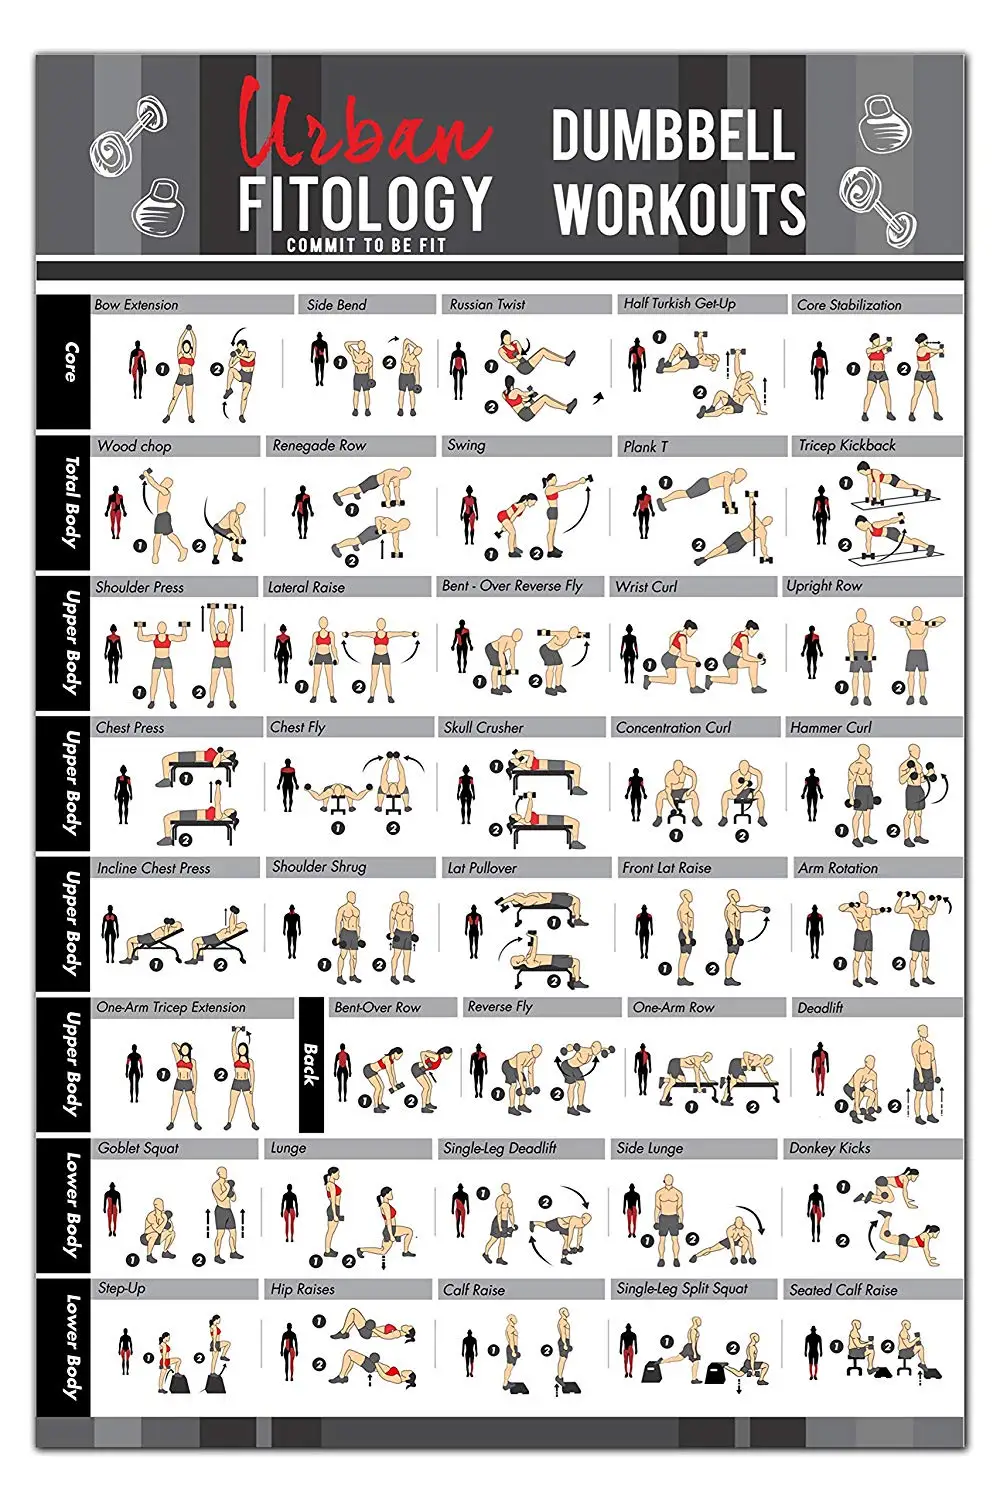 Buy Dumbbell Exercises Workout Poster - NOW LAMINATED - Home Gym